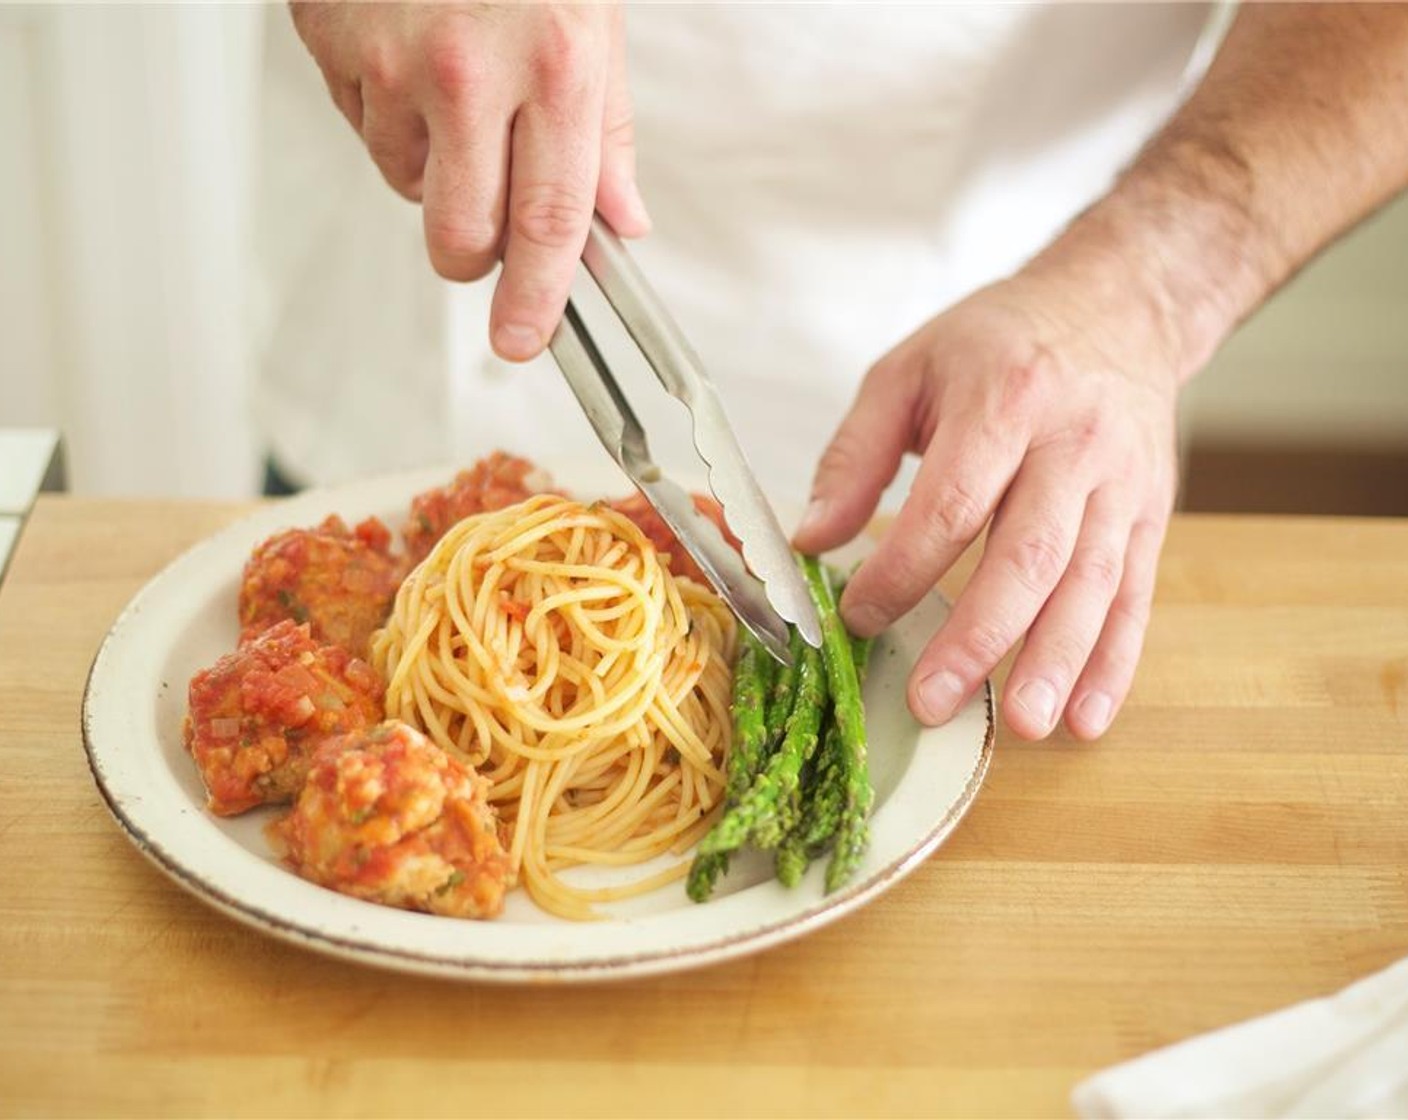 step 24 Divide the pasta between two plates. Place meatballs over the pasta with an even amount of sauce on both dishes. Sprinkle with the remaining Parmesan Cheese (1/4 cup). Place the asparagus on the side.